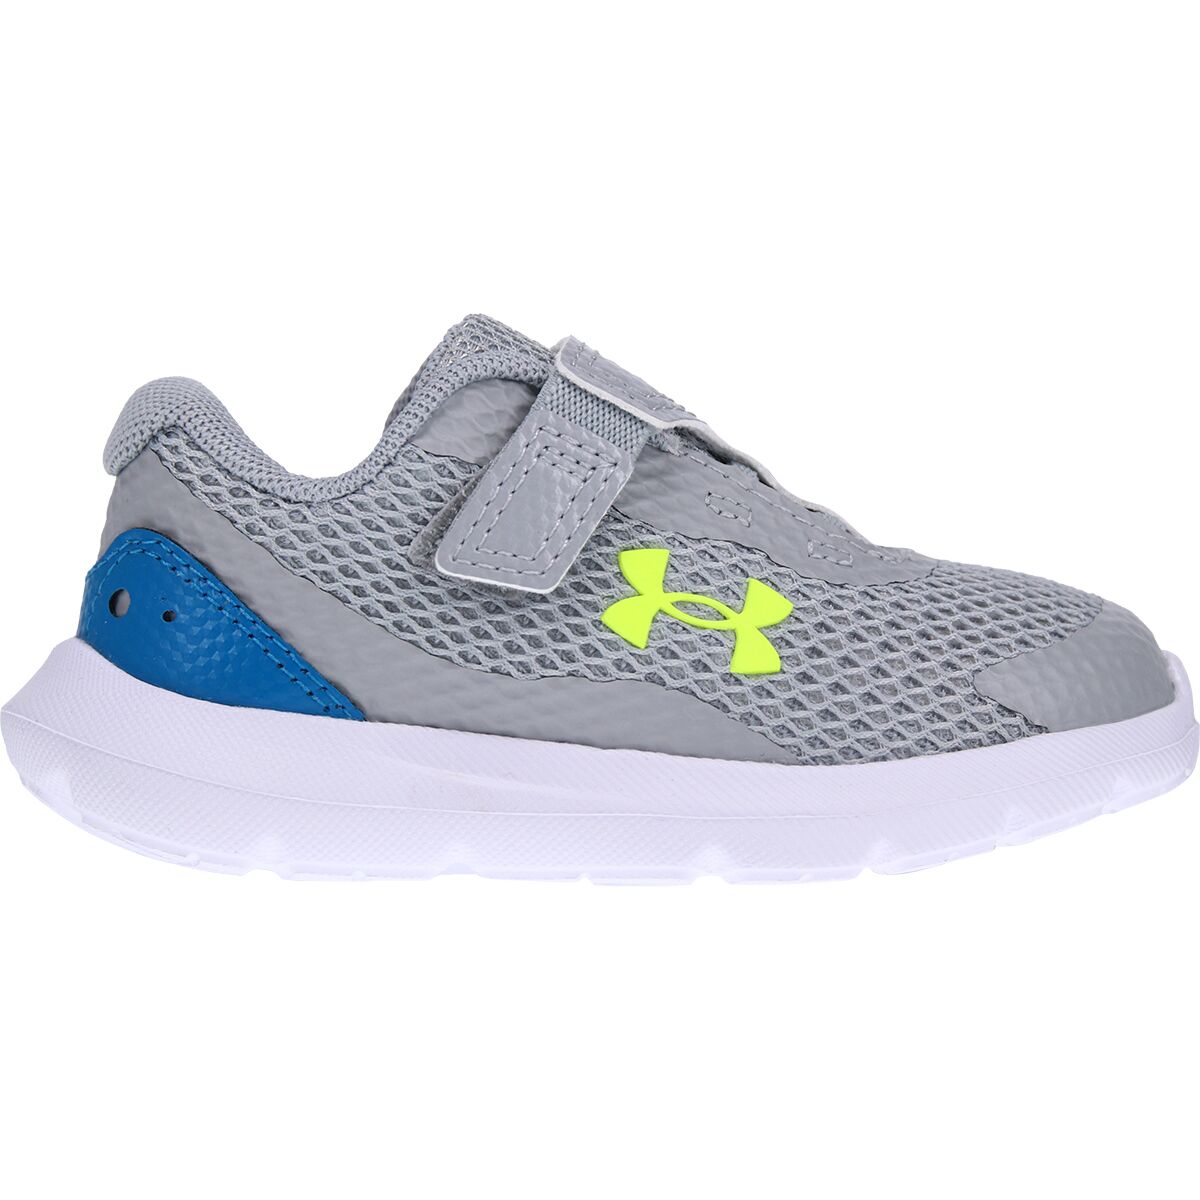 Under Armour BINF Surge 3 AC Shoe - Toddler Boys'